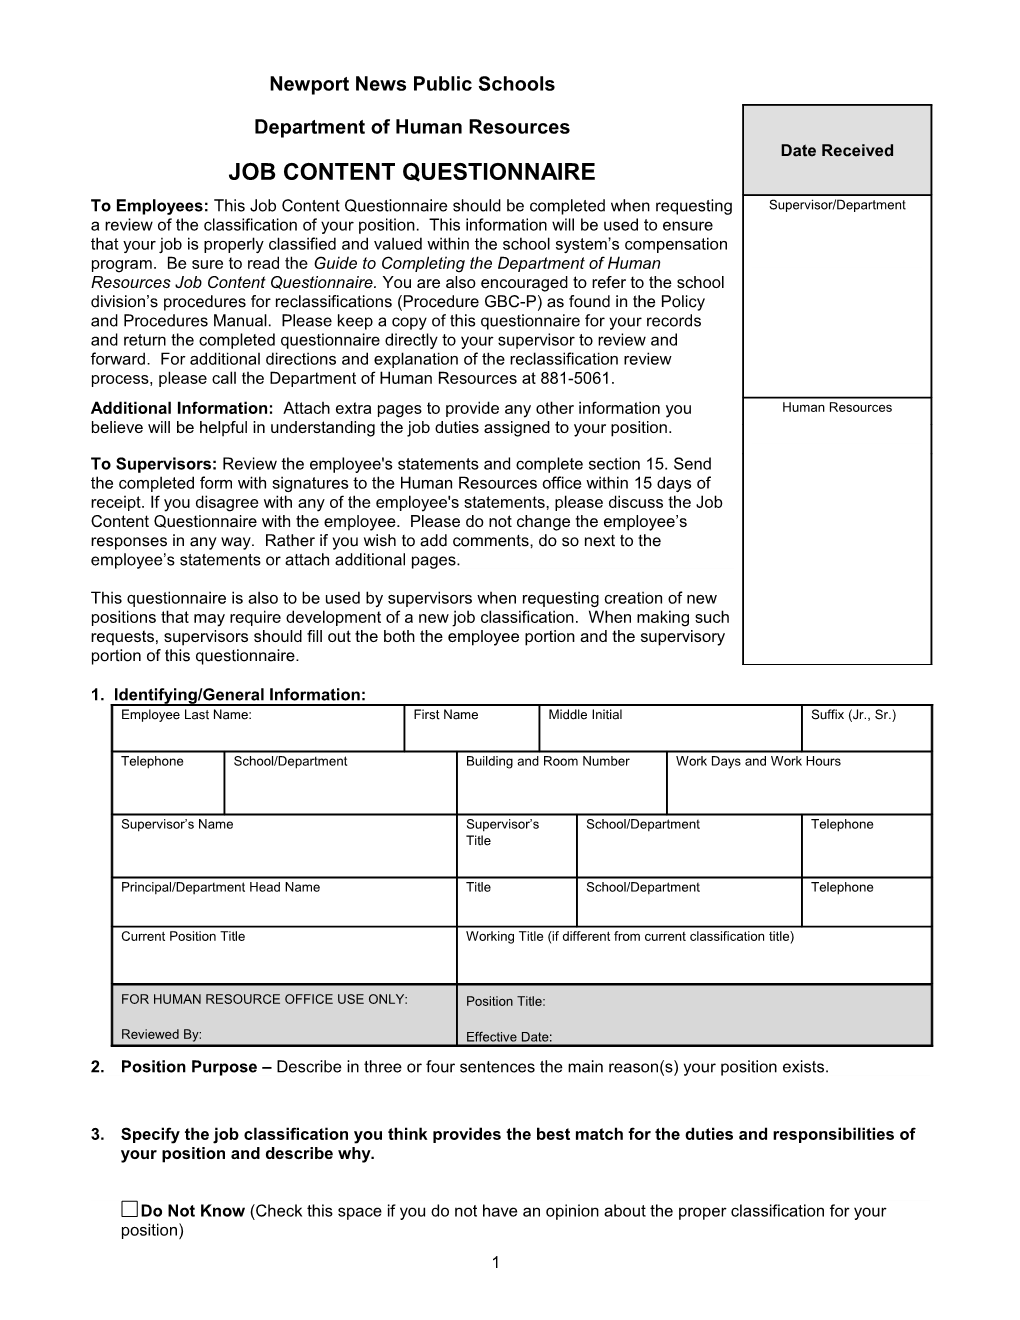 Classified Staff Position Questionnaire